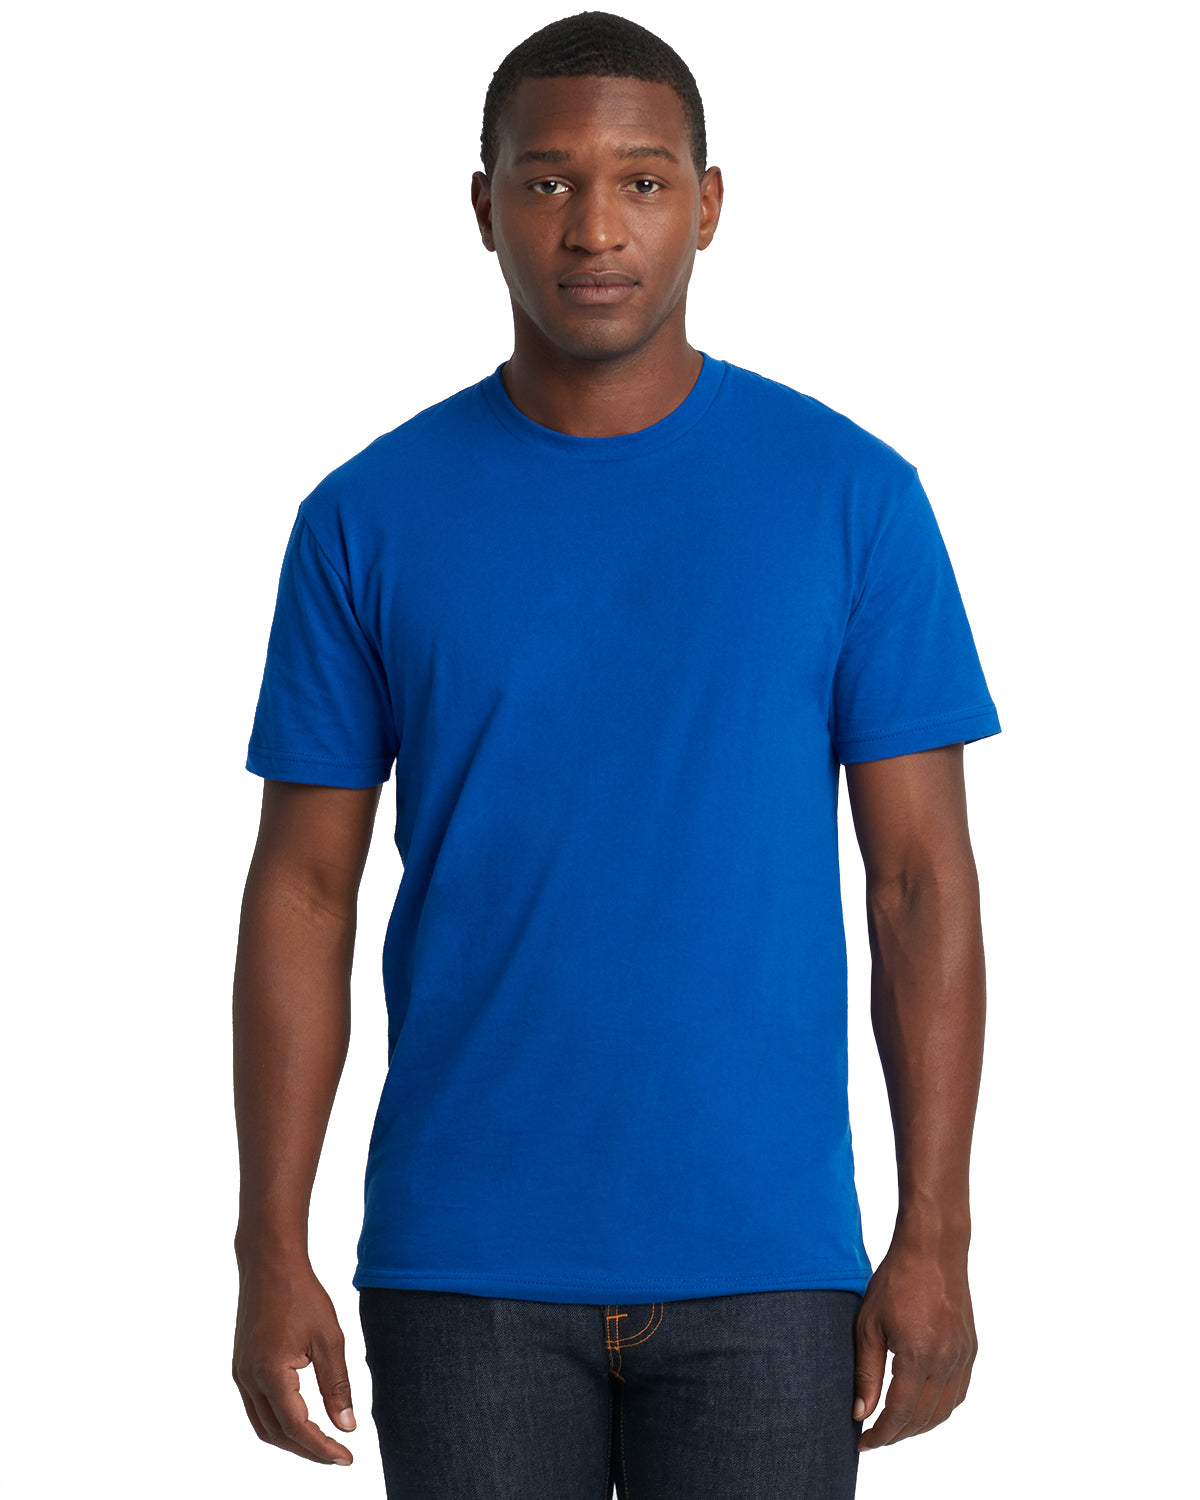 model wearing next level unisex cotton tee in royal blue